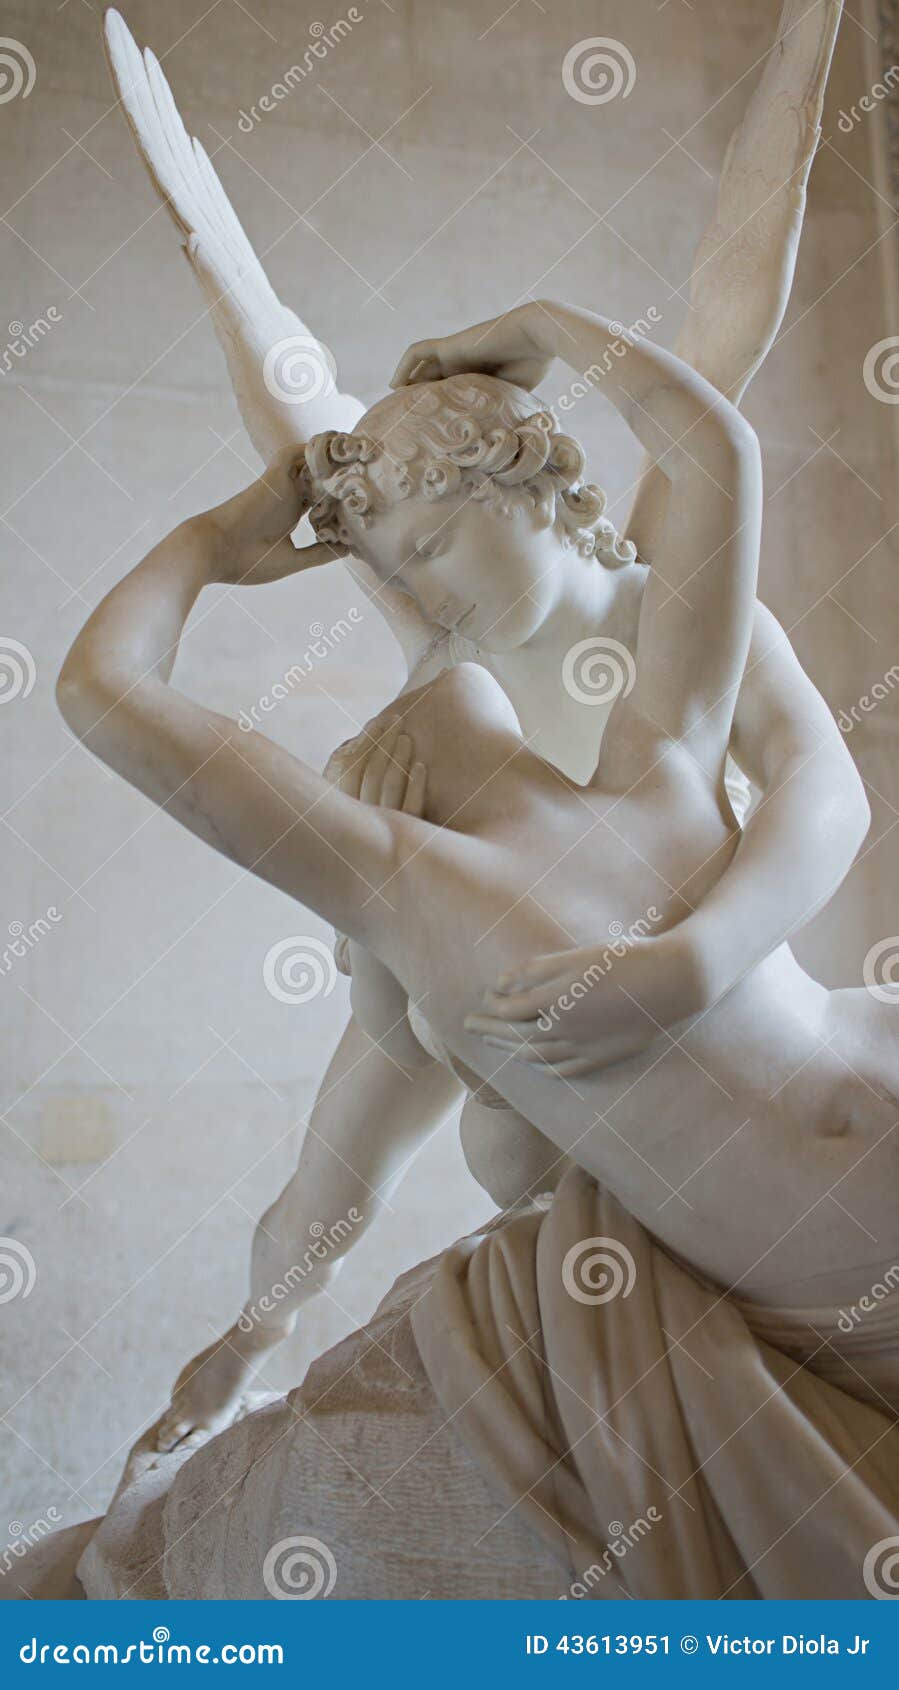 psyche revived by cupid's kiss sculpture